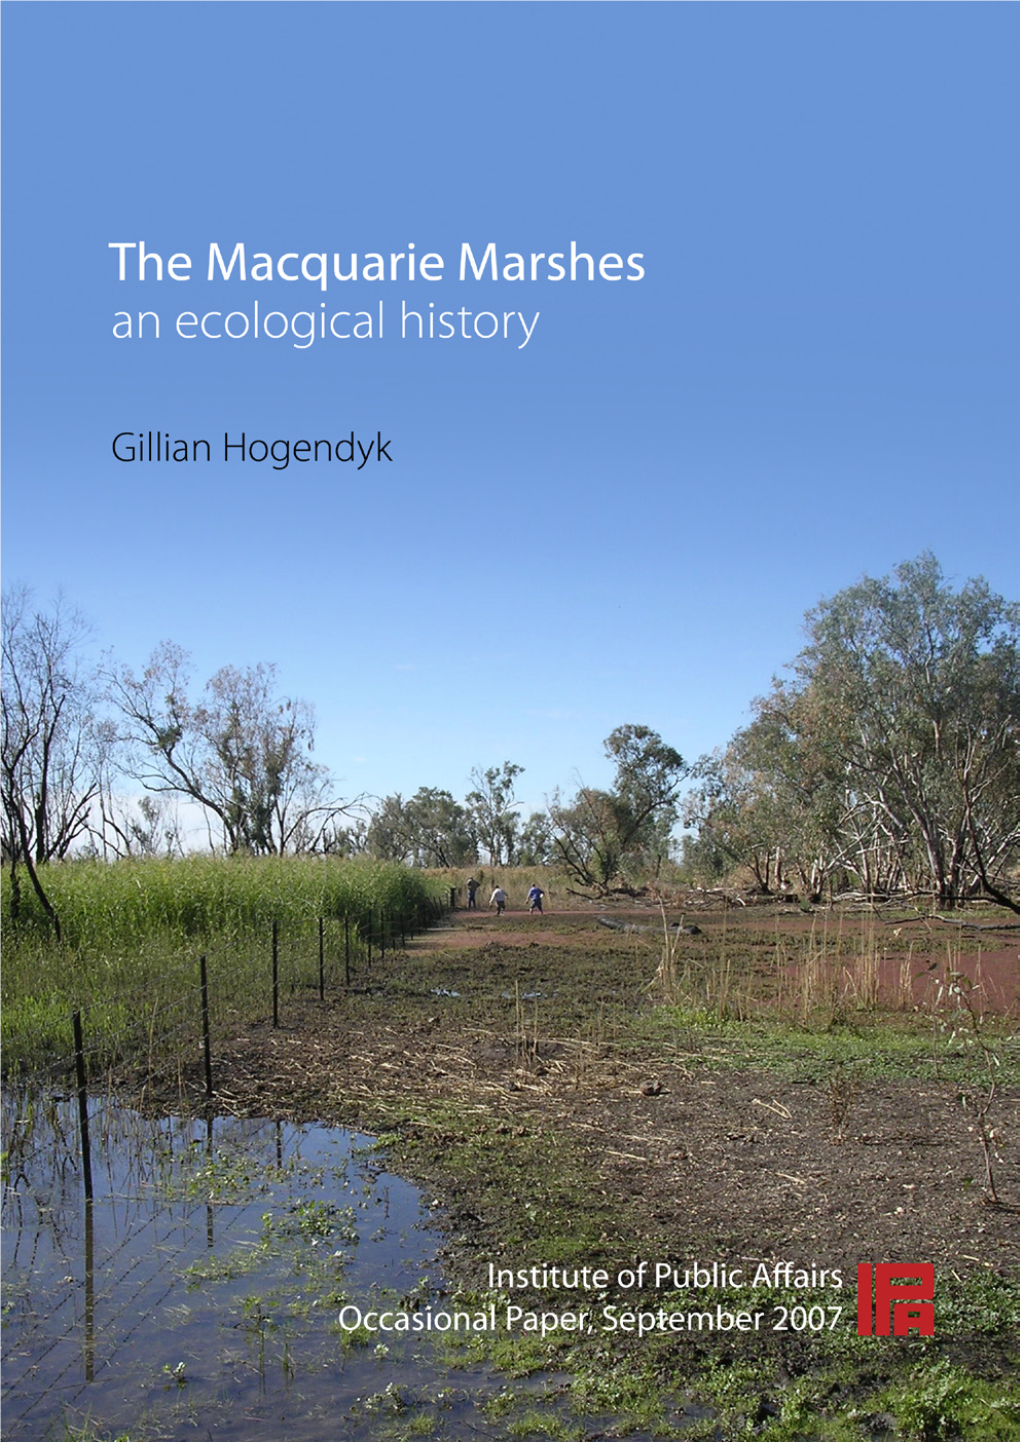 The Macquarie Marshes: an Ecological History